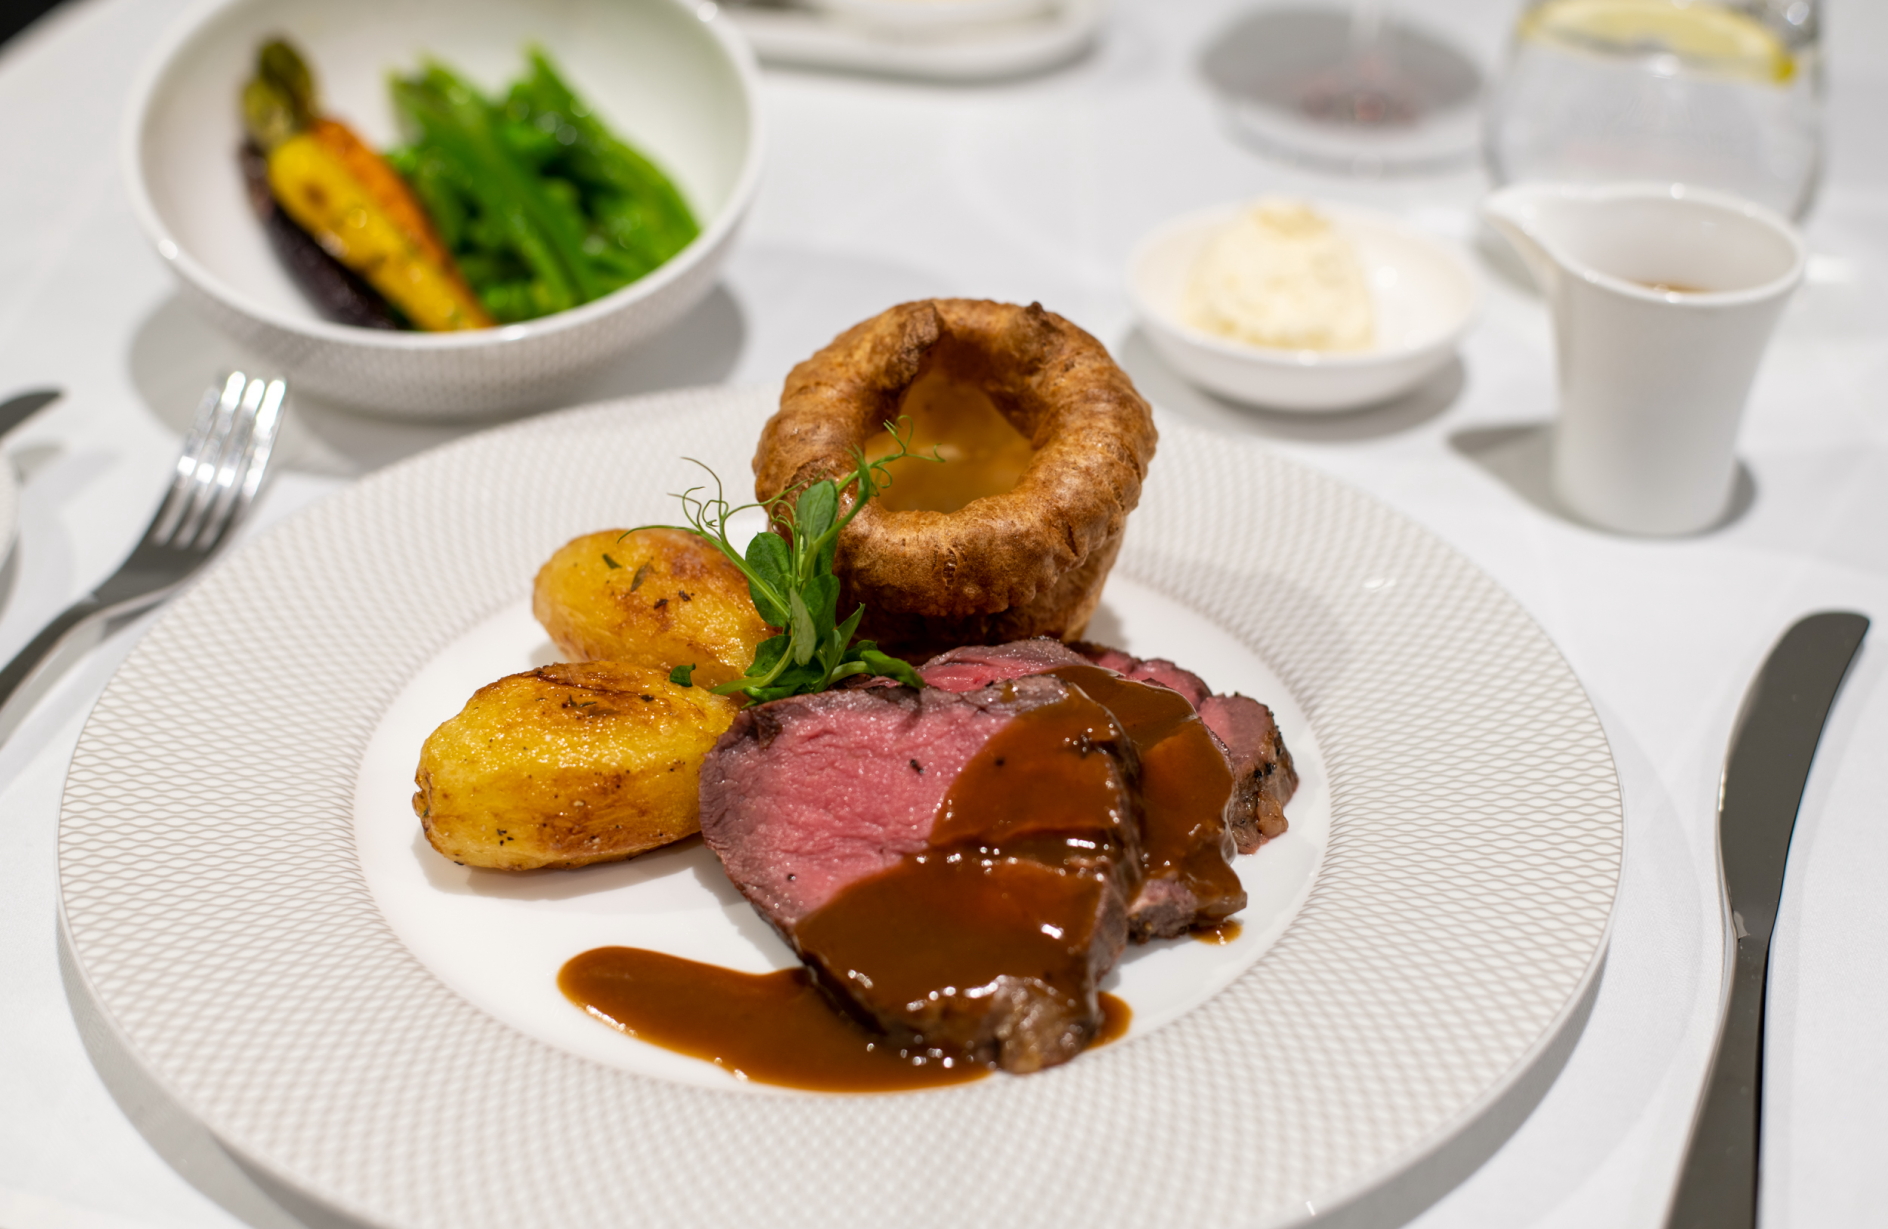 Lovely jubbly! British Airways' traditional roast will feature 21-day aged British beef, served with roast potatoes, Yorkshire pudding, seasonal vegetables, horseradish cream and gravy. Click to enlarge.